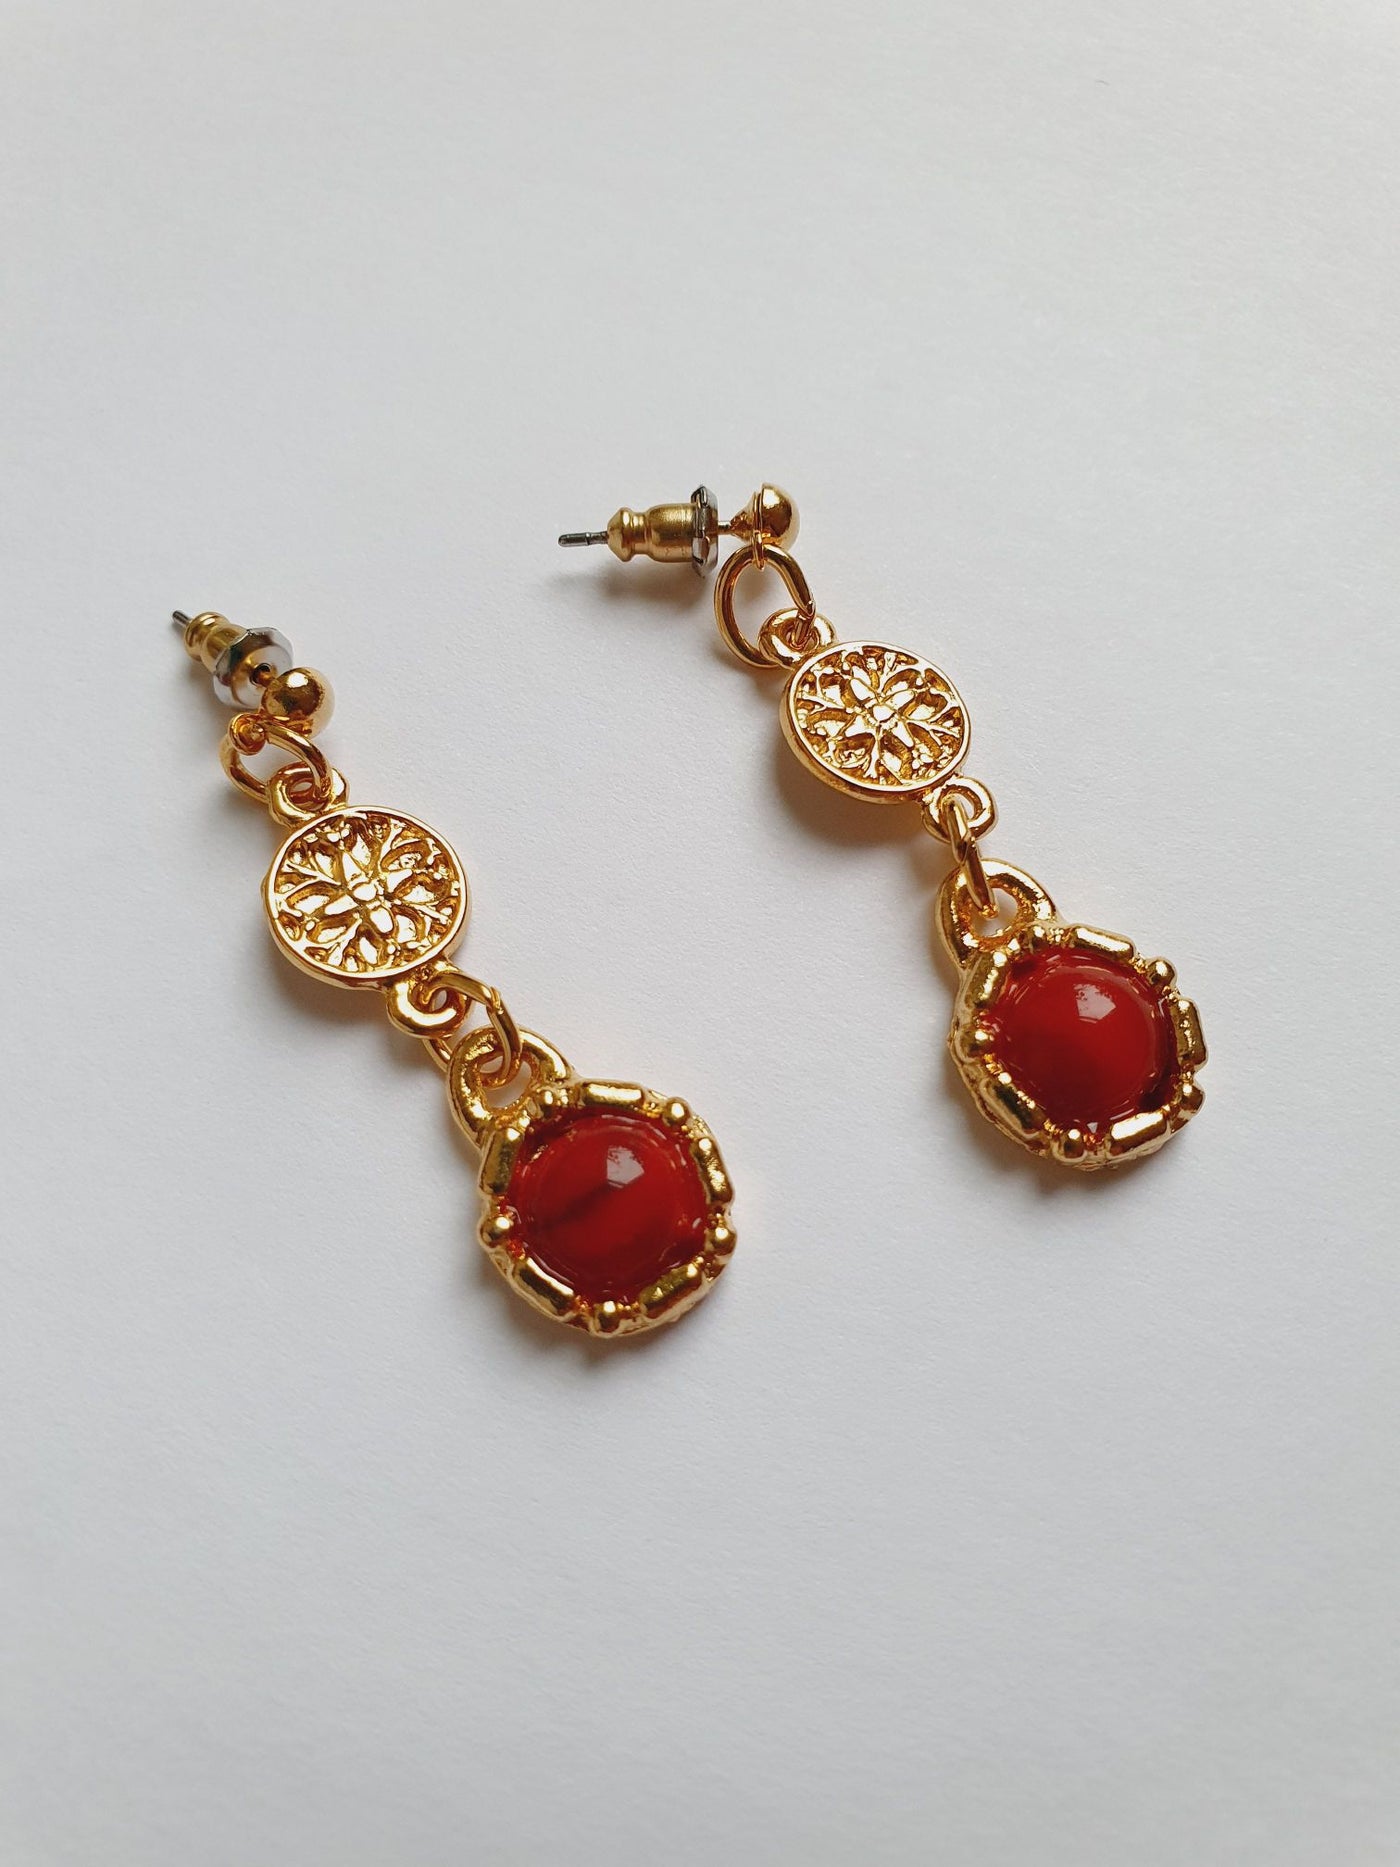 Vintage 80s Gold Plated Textured Drop Earrings with Red Charm